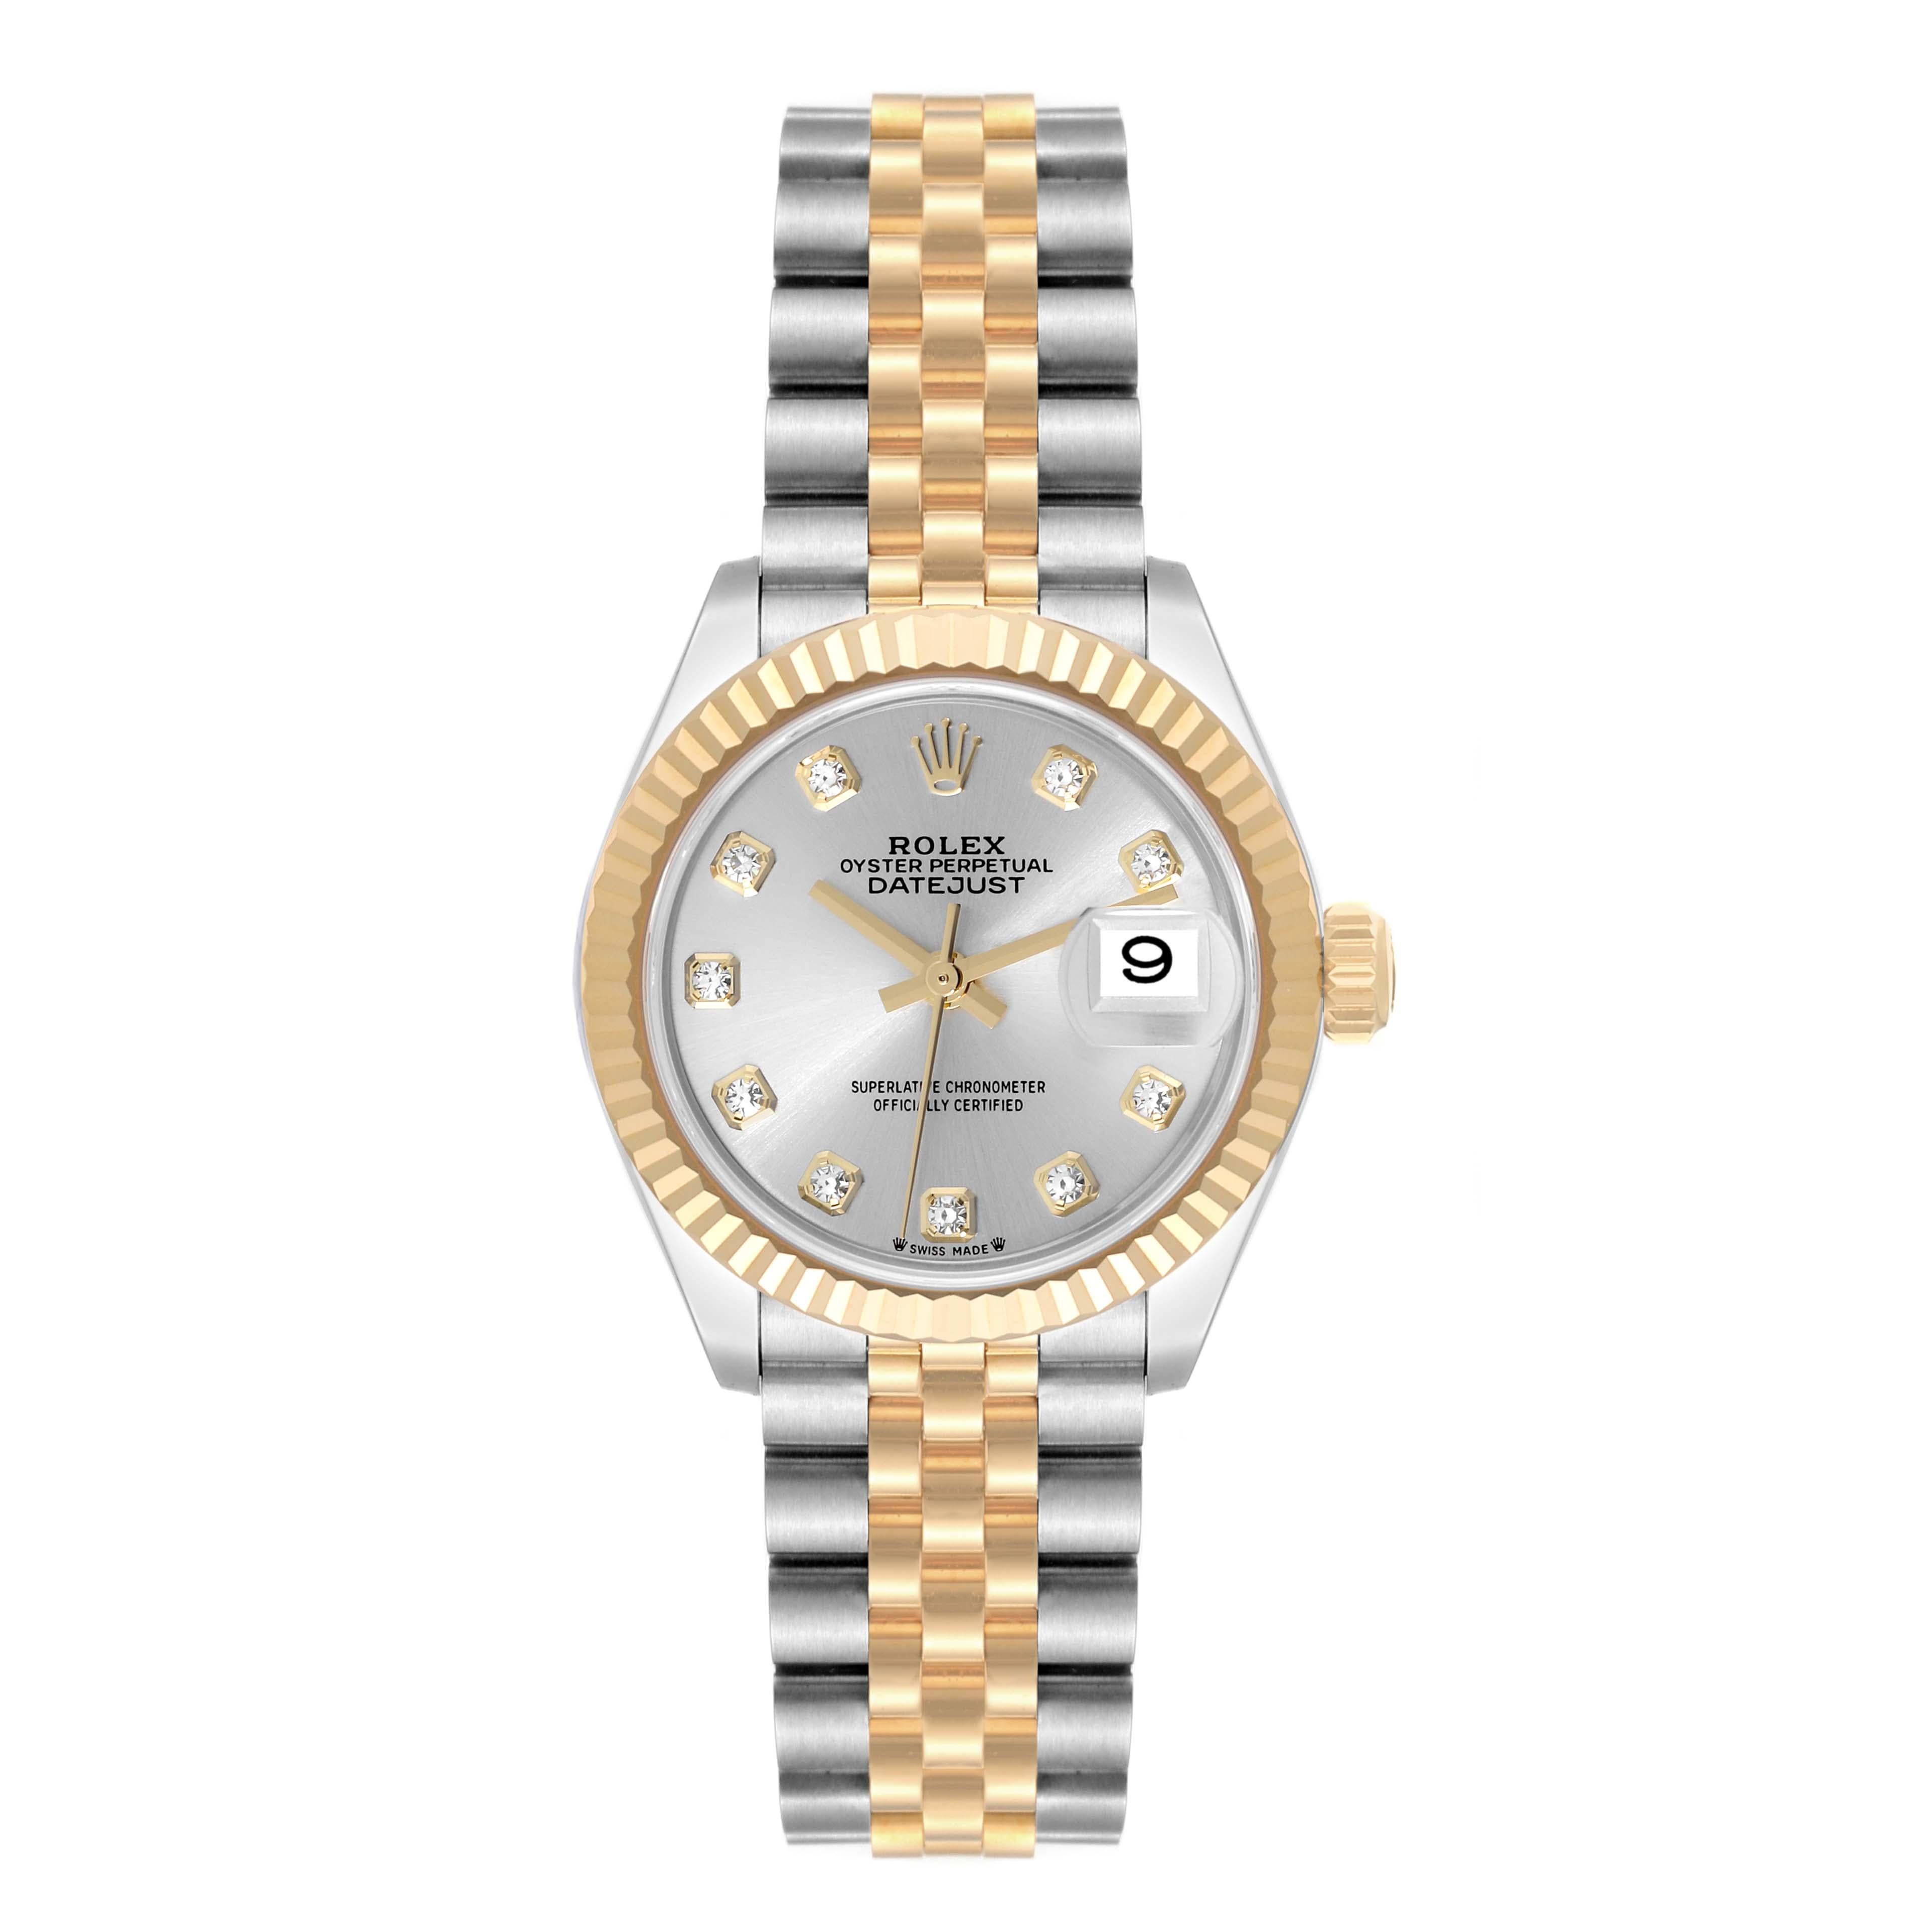 Rolex Datejust 28 Steel Yellow Gold Diamond Ladies Watch 279173 Unworn. Officially certified chronometer self-winding movement. Stainless steel oyster case 28.0 mm in diameter. Rolex logo on a 18K yellow gold crown. 18k yellow gold fluted bezel.